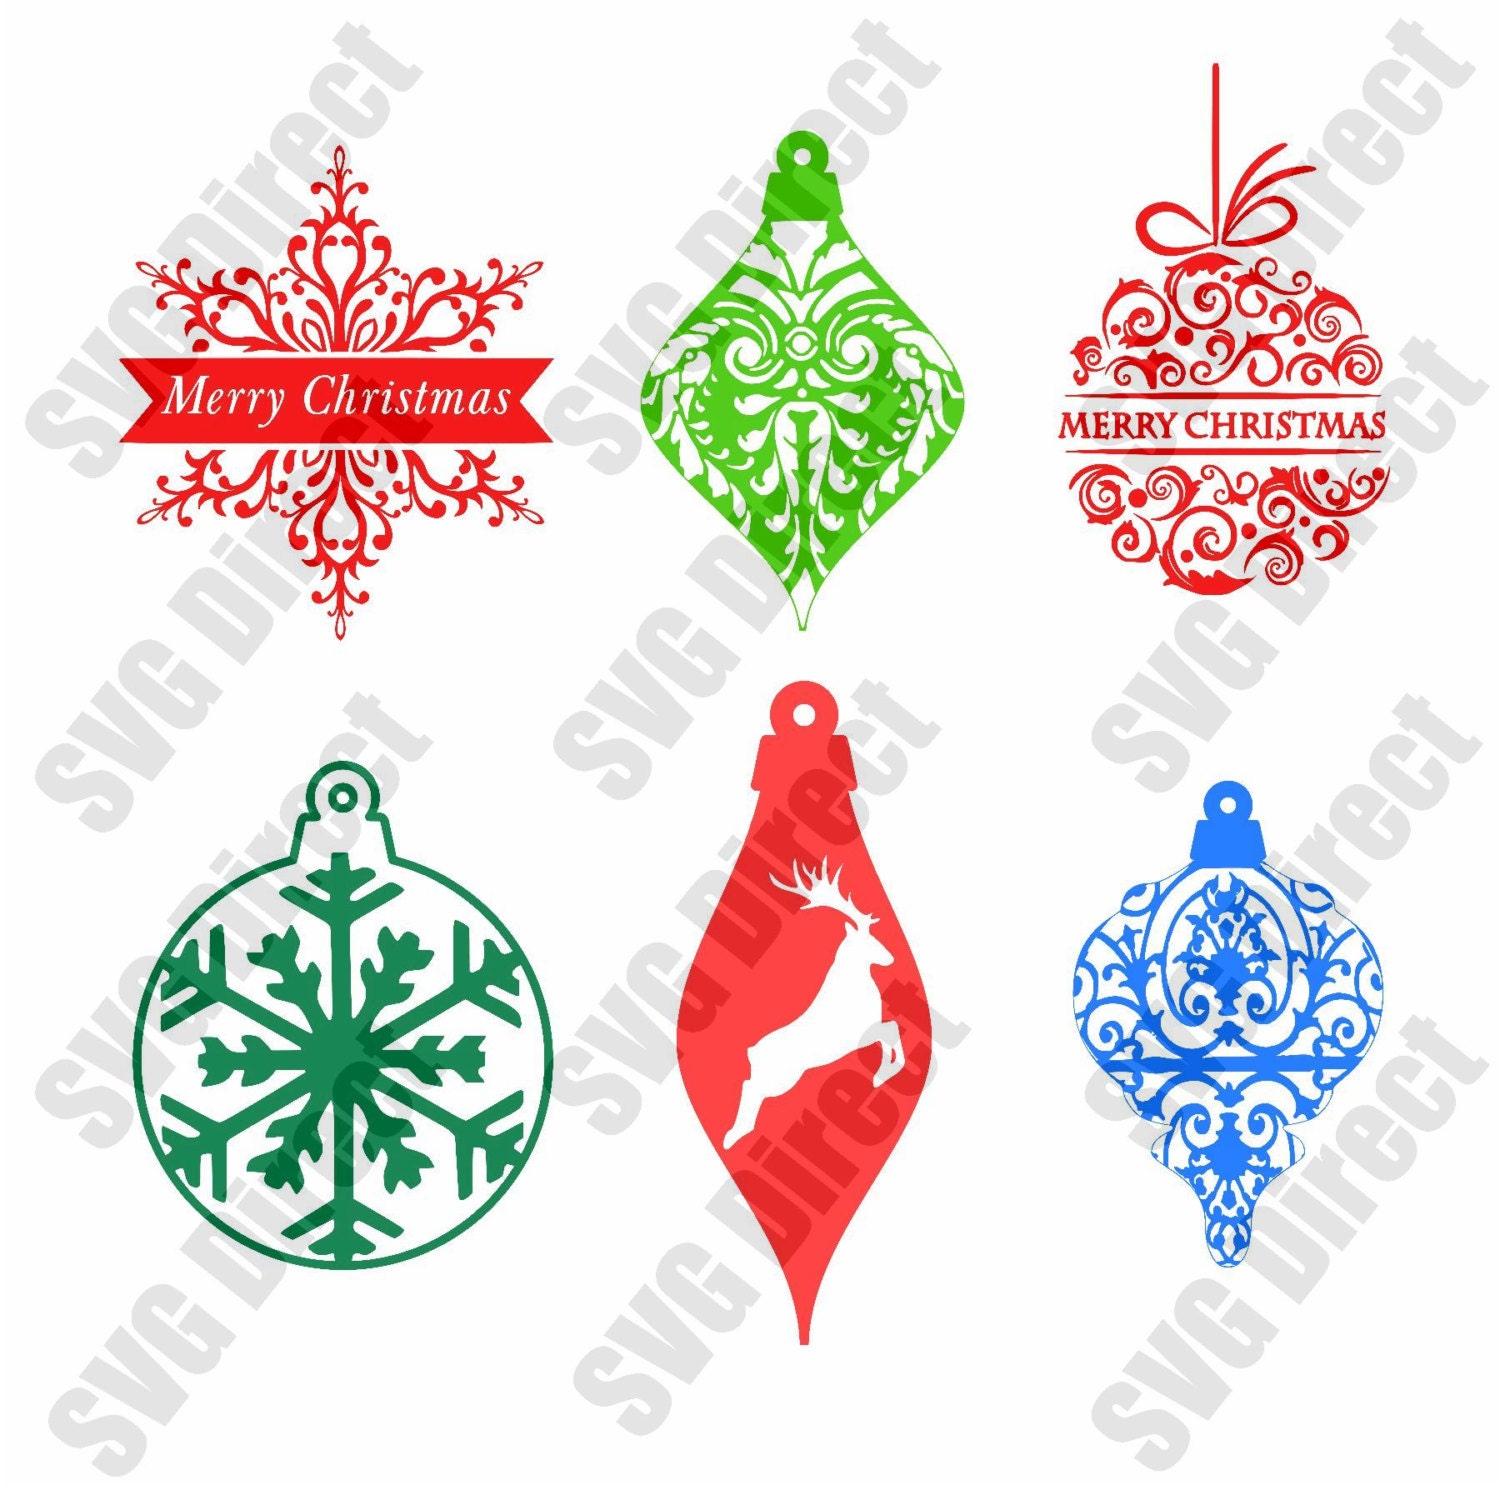 Download 6 designs total of Ornate Christmas Ornaments SVG cut file ...